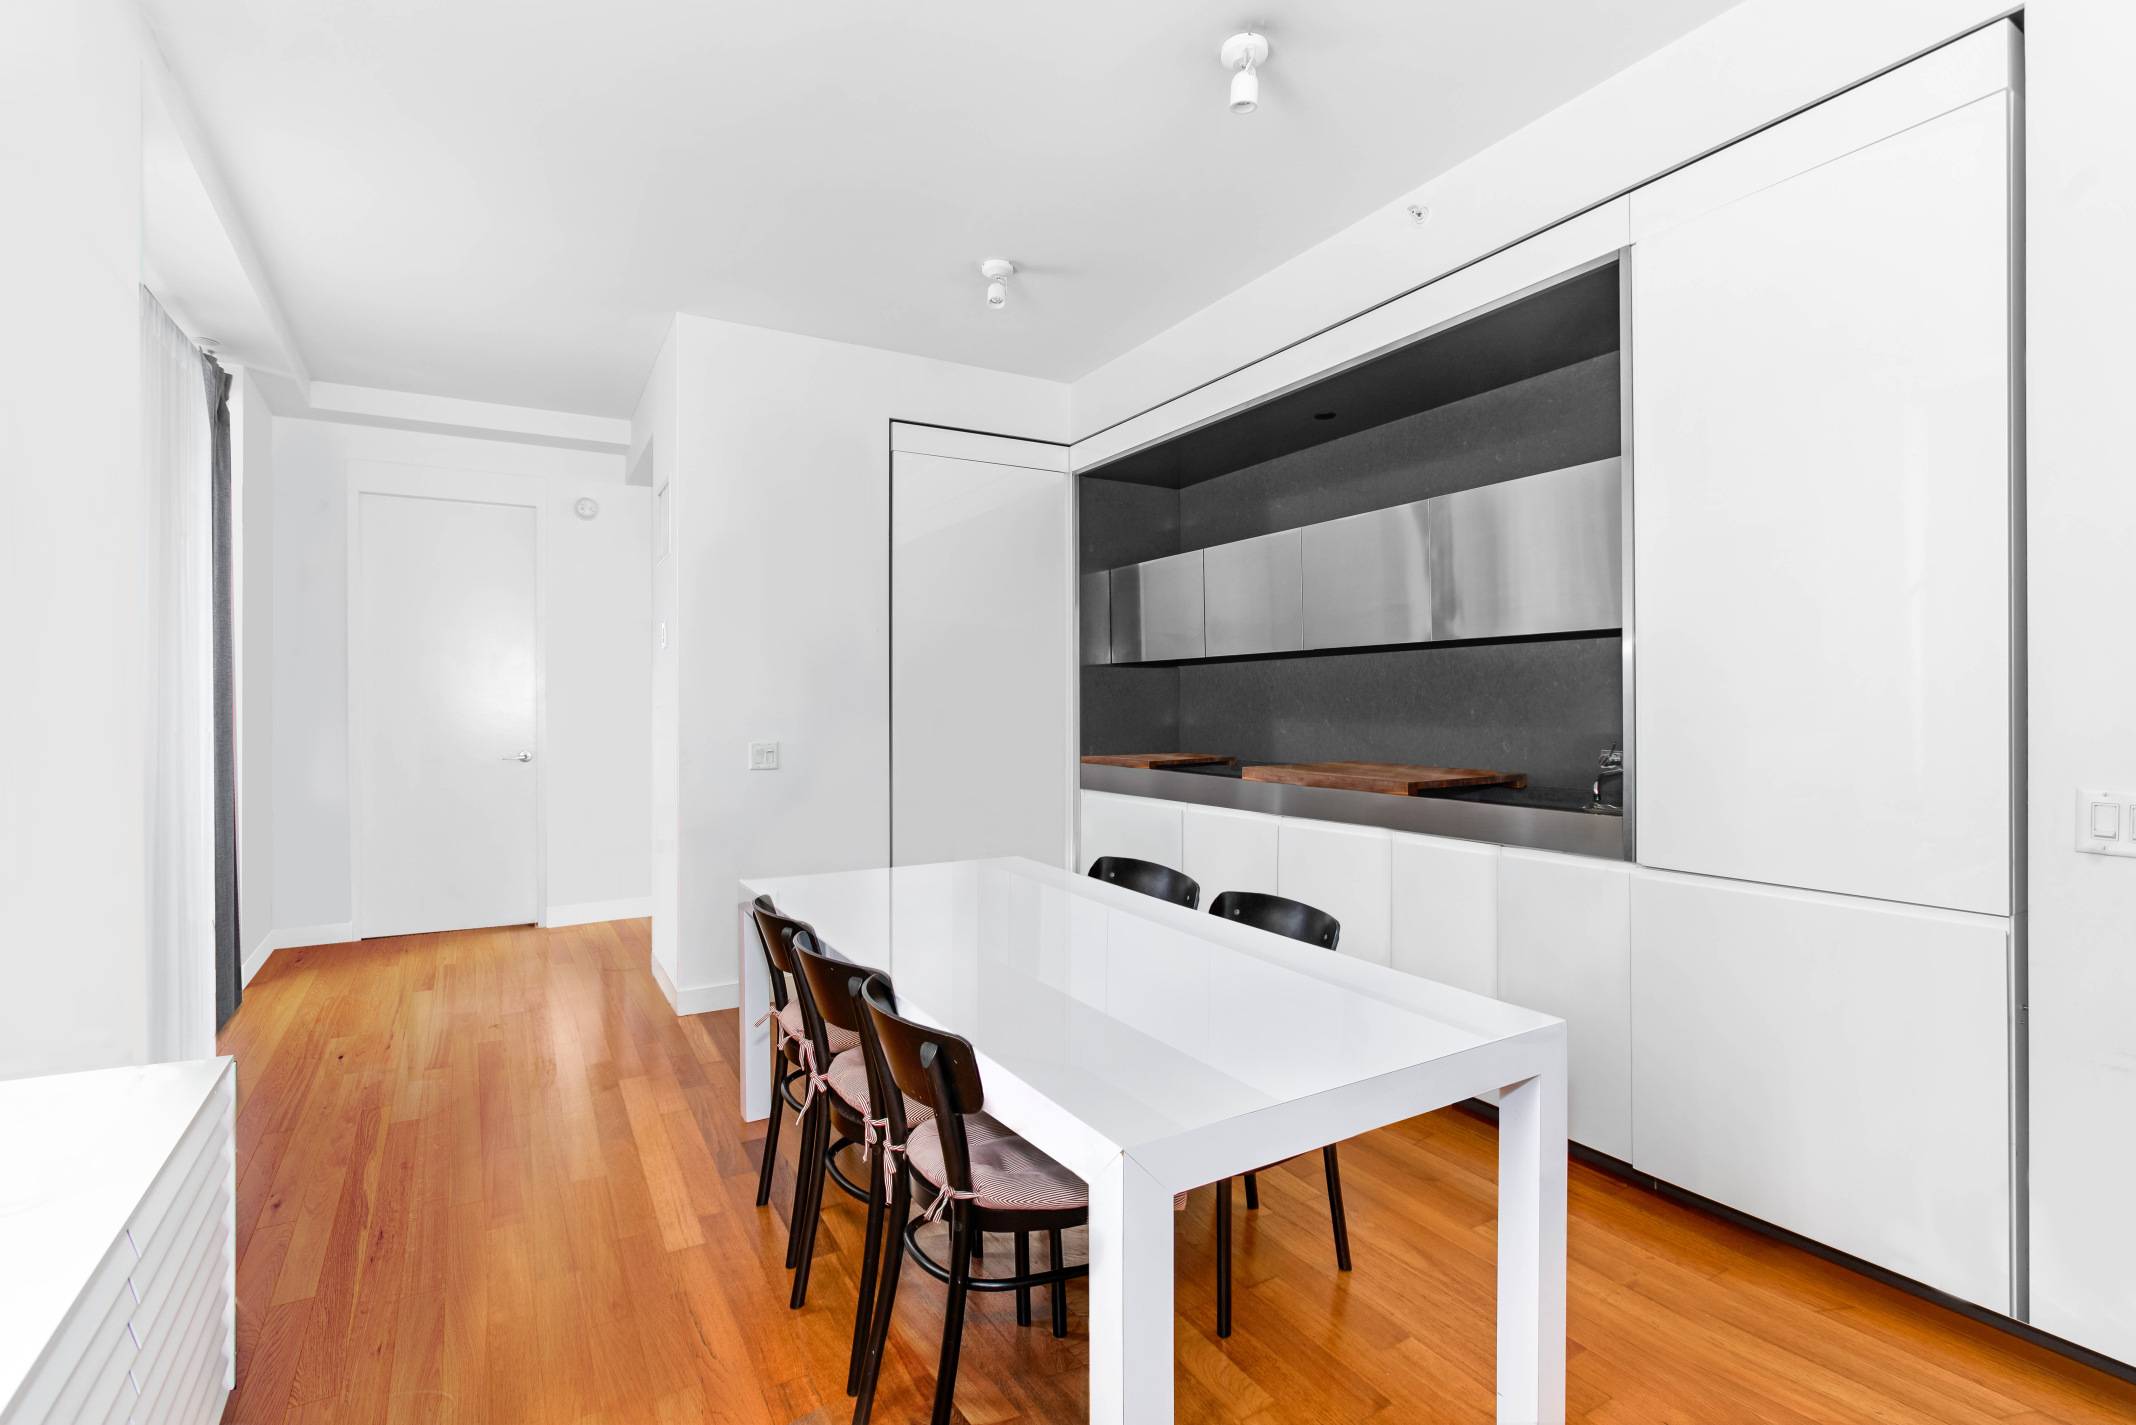 Available for rent, this magnificent two bedroom, two bathroom condominium is an amenity rich oasis in the heart of the exciting Financial District.